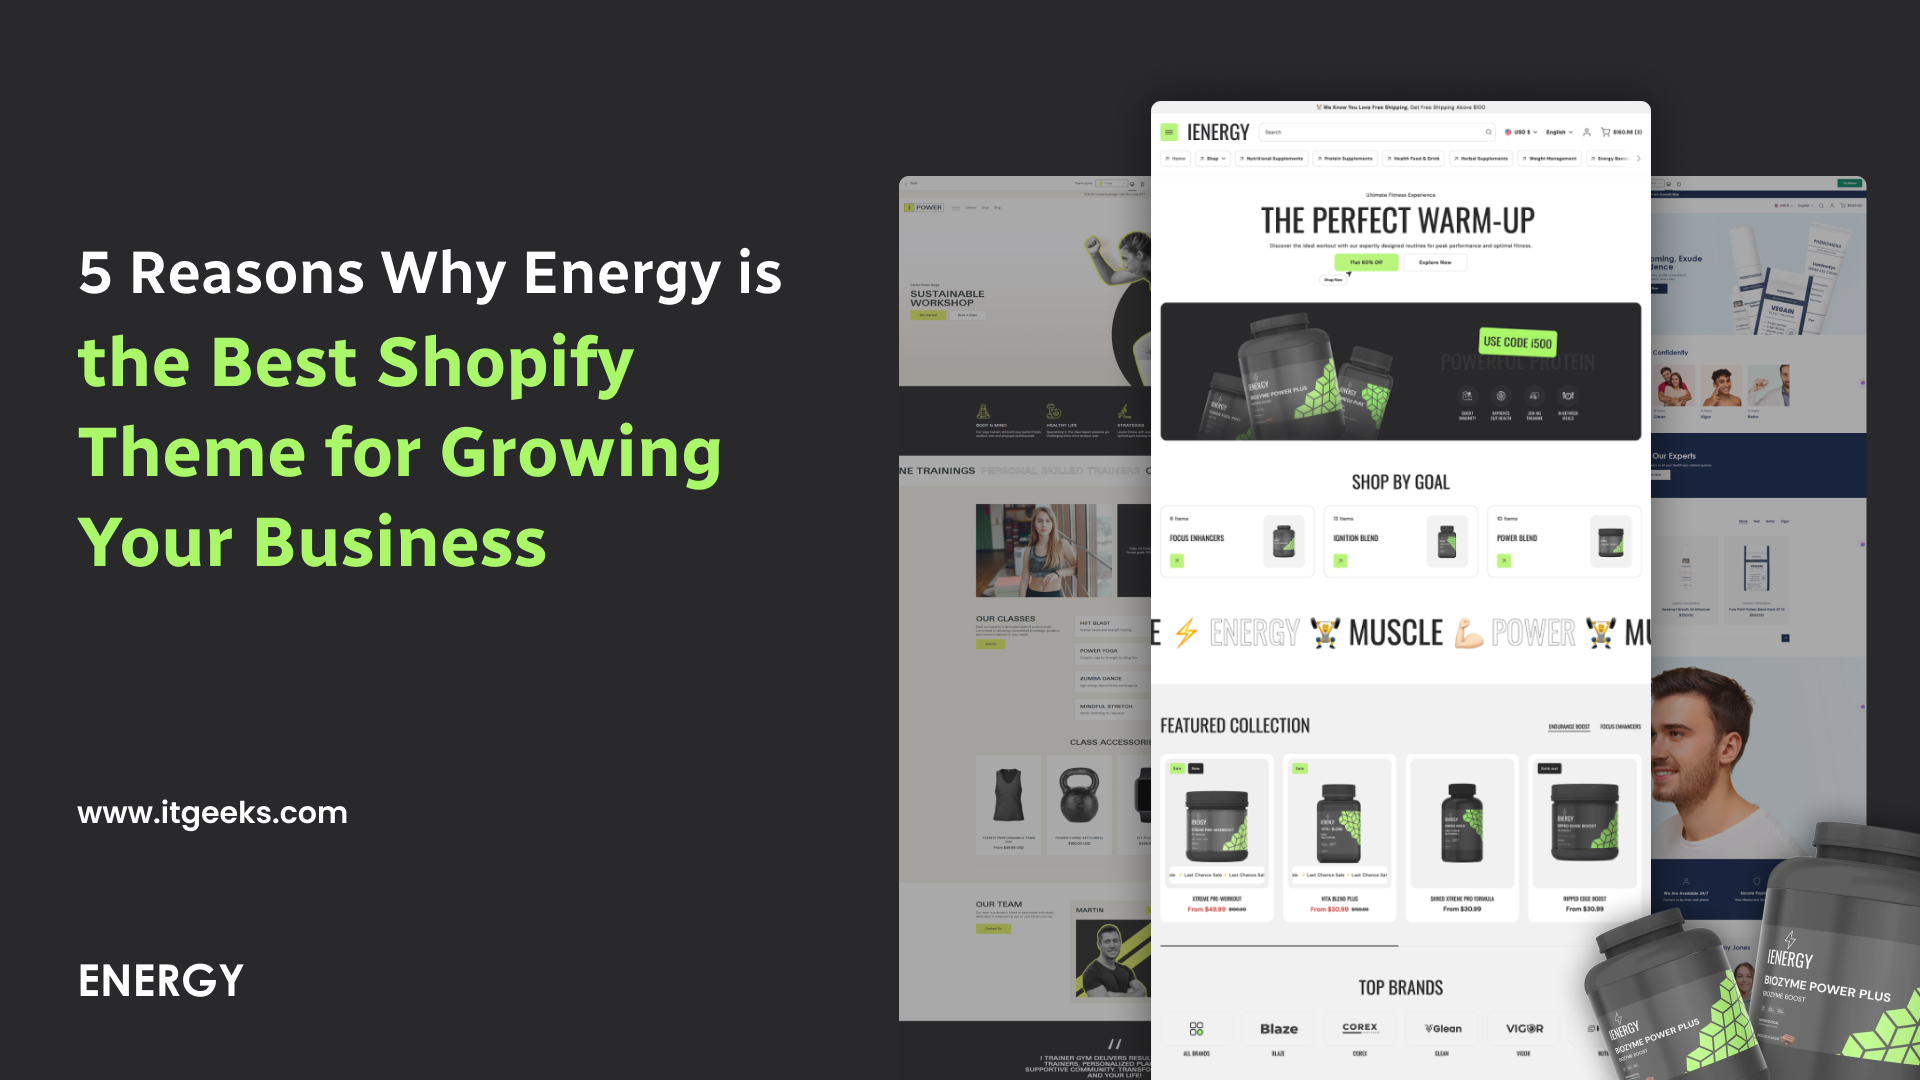 5 Reasons Why Energy is the Best Shopify Theme for Growing Your Business